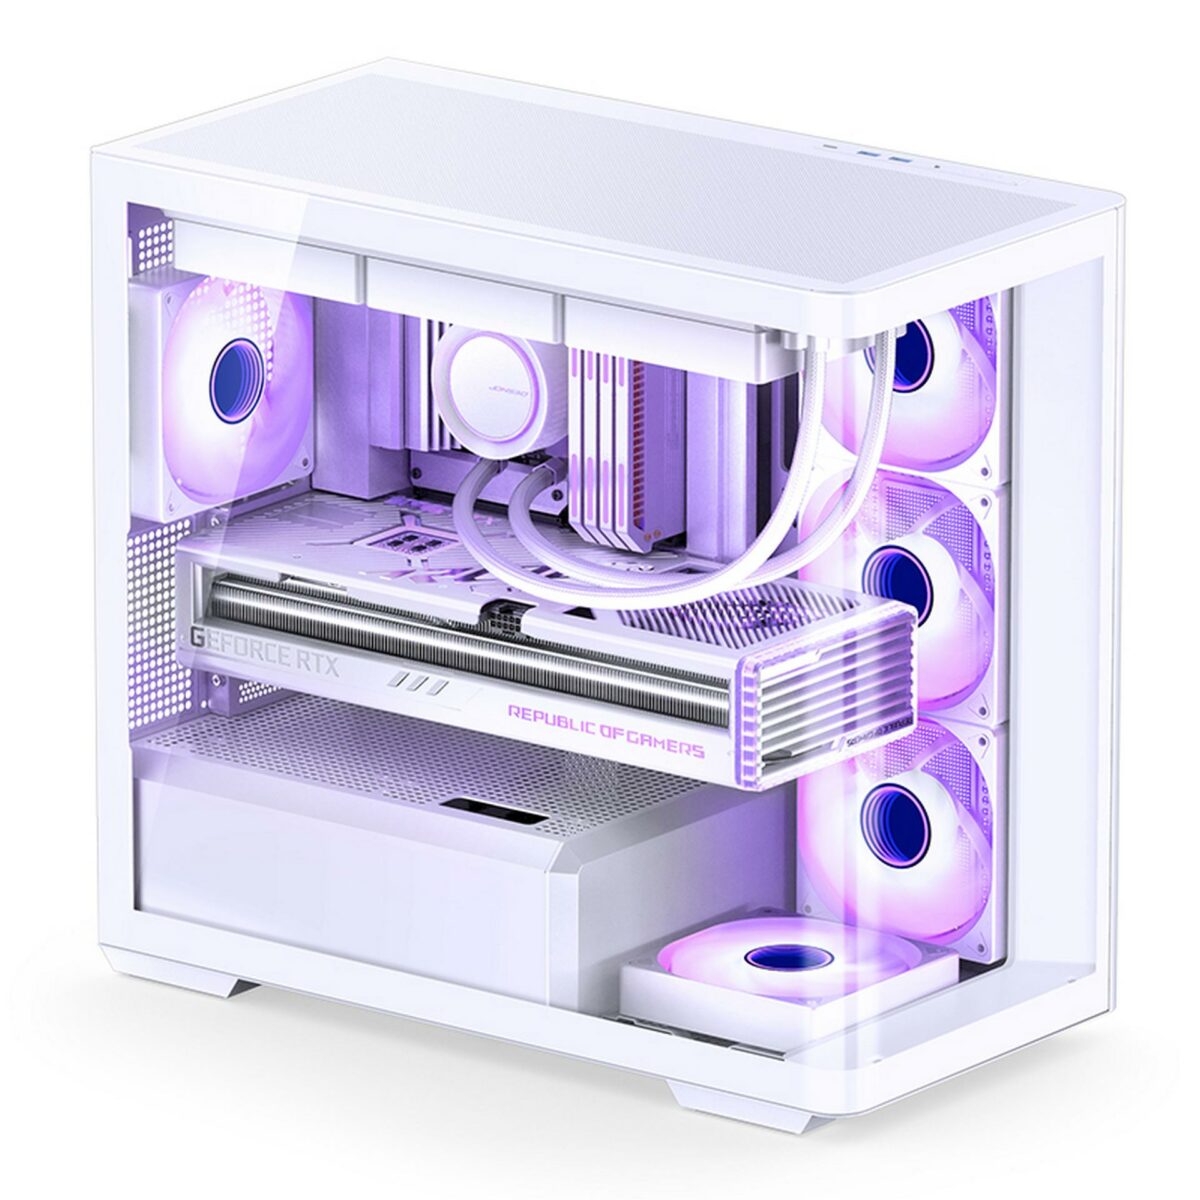 White Jonsbo D300 PC chassis right side view with RGB on.